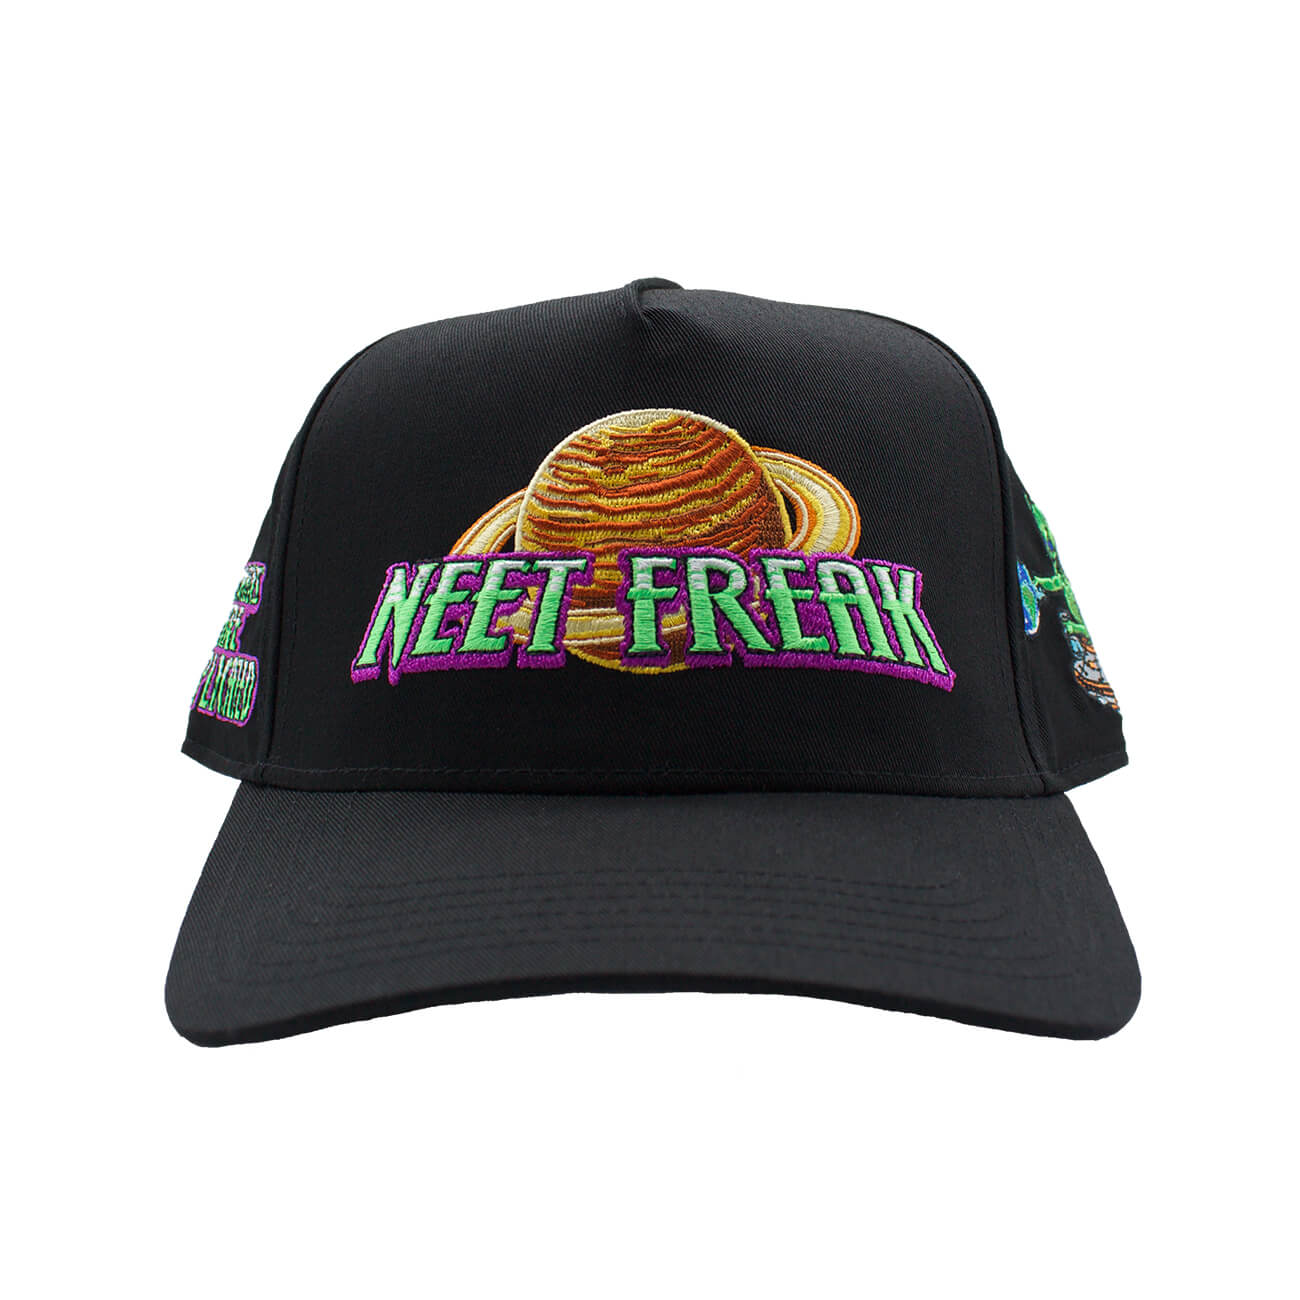 Out of this World Black Trucker Hat